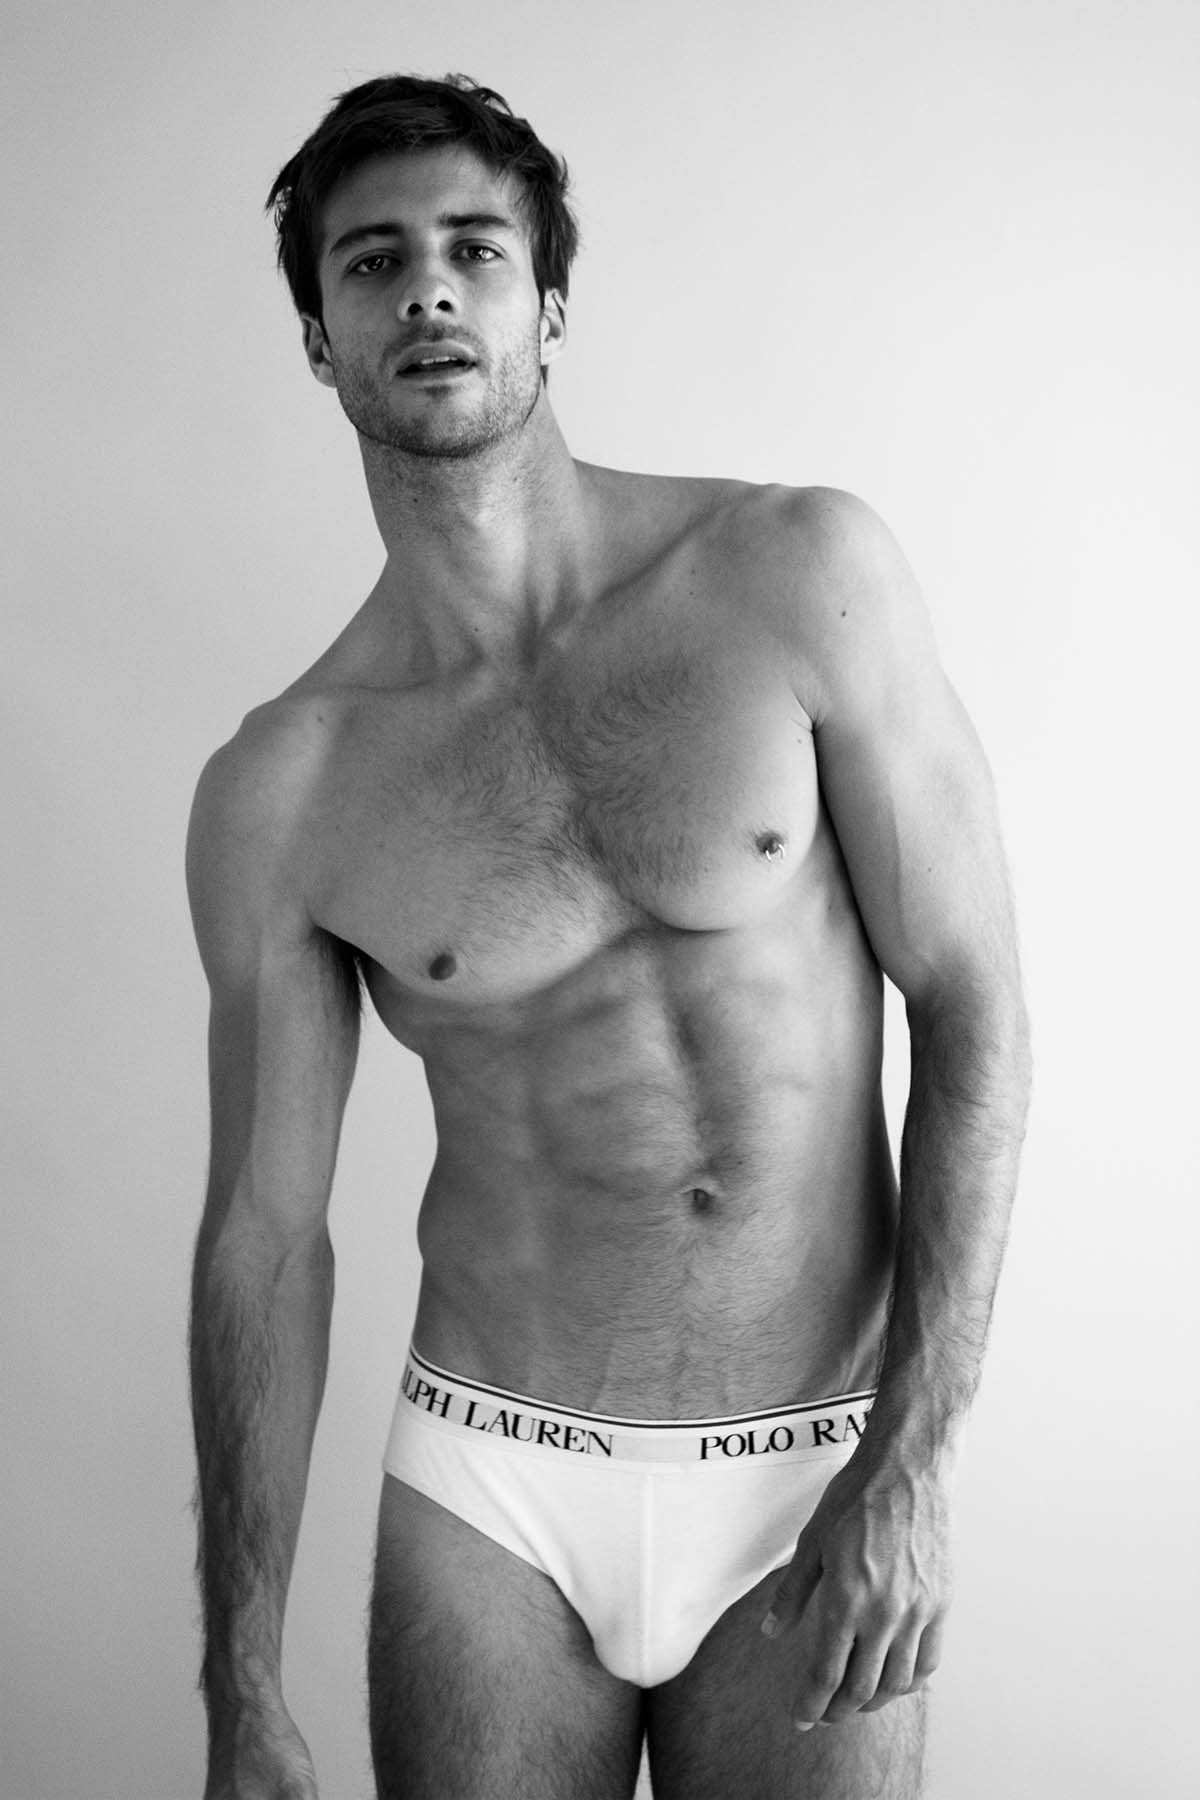 Gilberto Fritsch by Shinyoung Ma for Brazilian Male Model Mag.